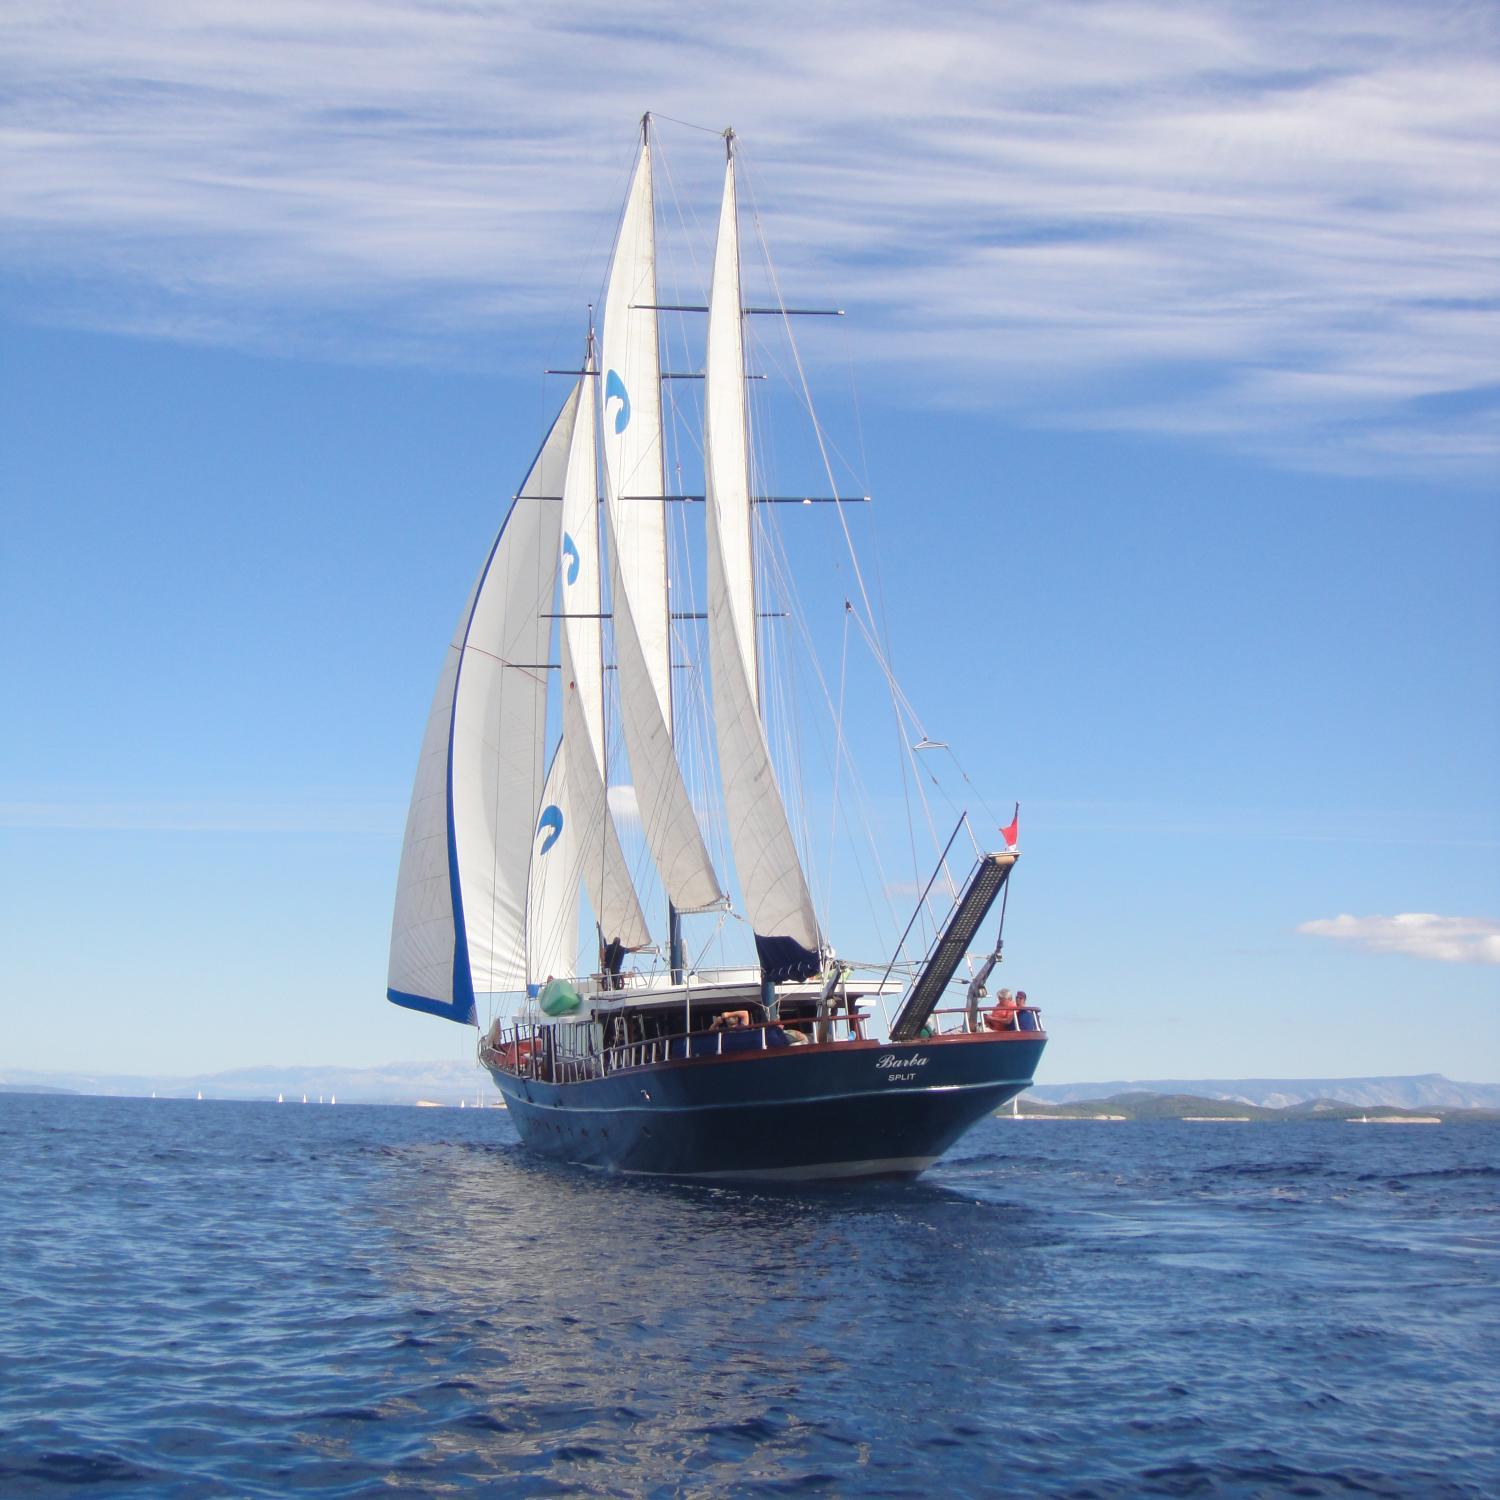 Gulet Barba invites you to sail with us on  43 meter long old fashion sailing ship along Adriatic coast and islands